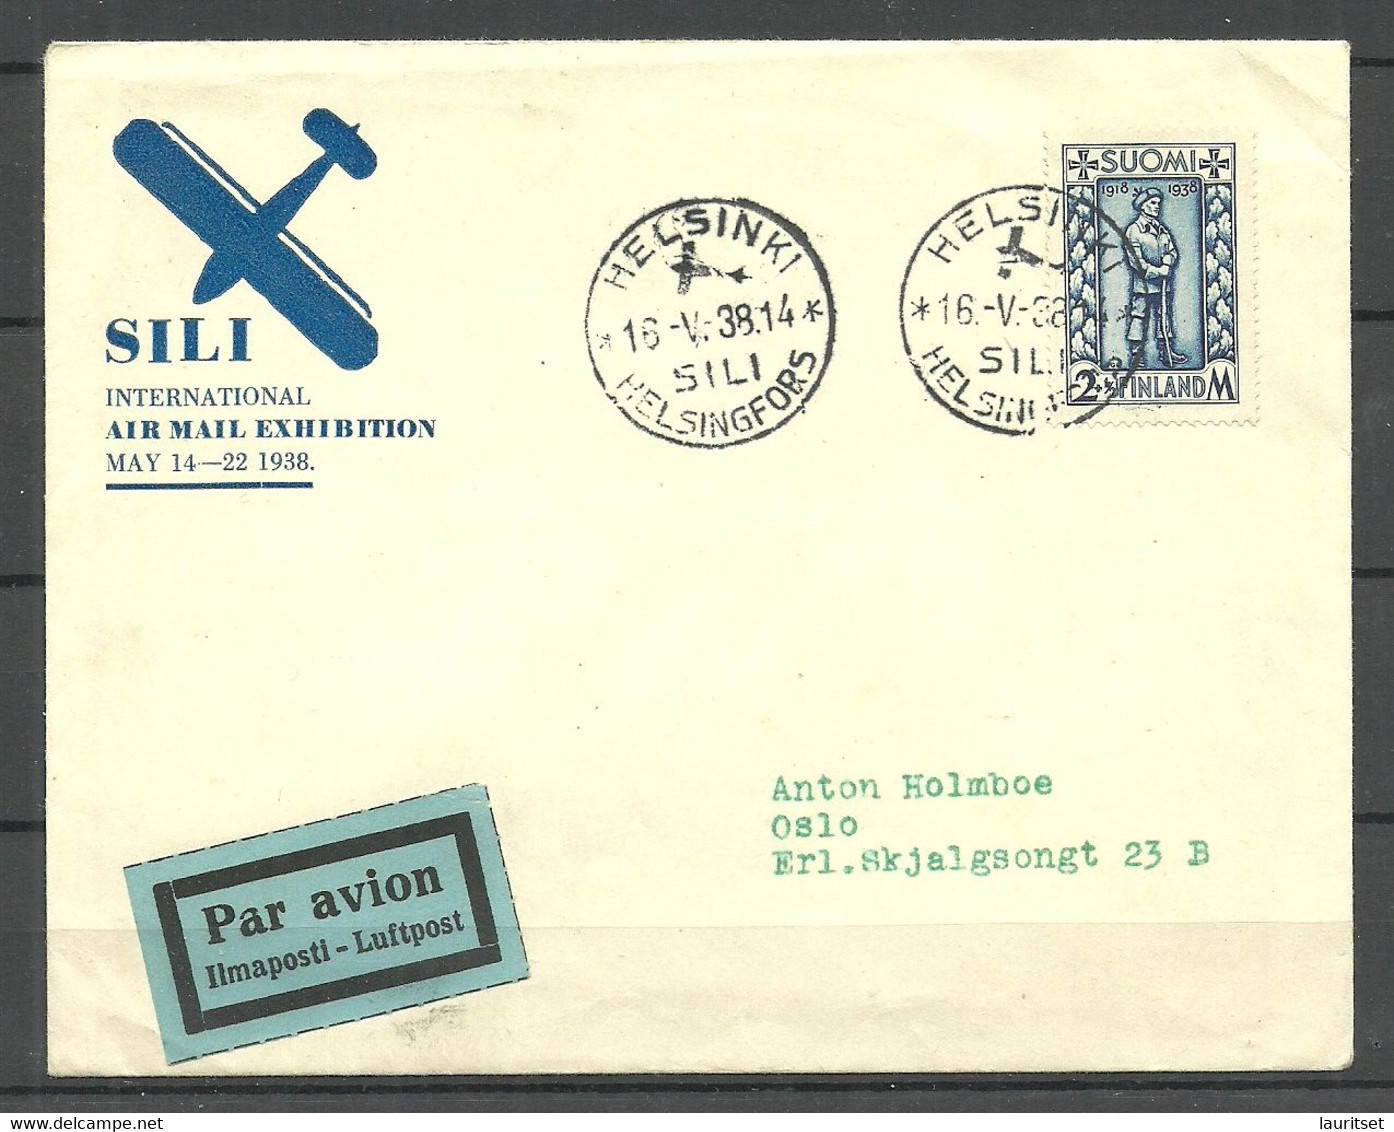 FINLAND 1939 Illustrated Cover SILI International Air Mail Exhibition Flugpost Air Plane Michel 211 As Single FDC? - Briefe U. Dokumente